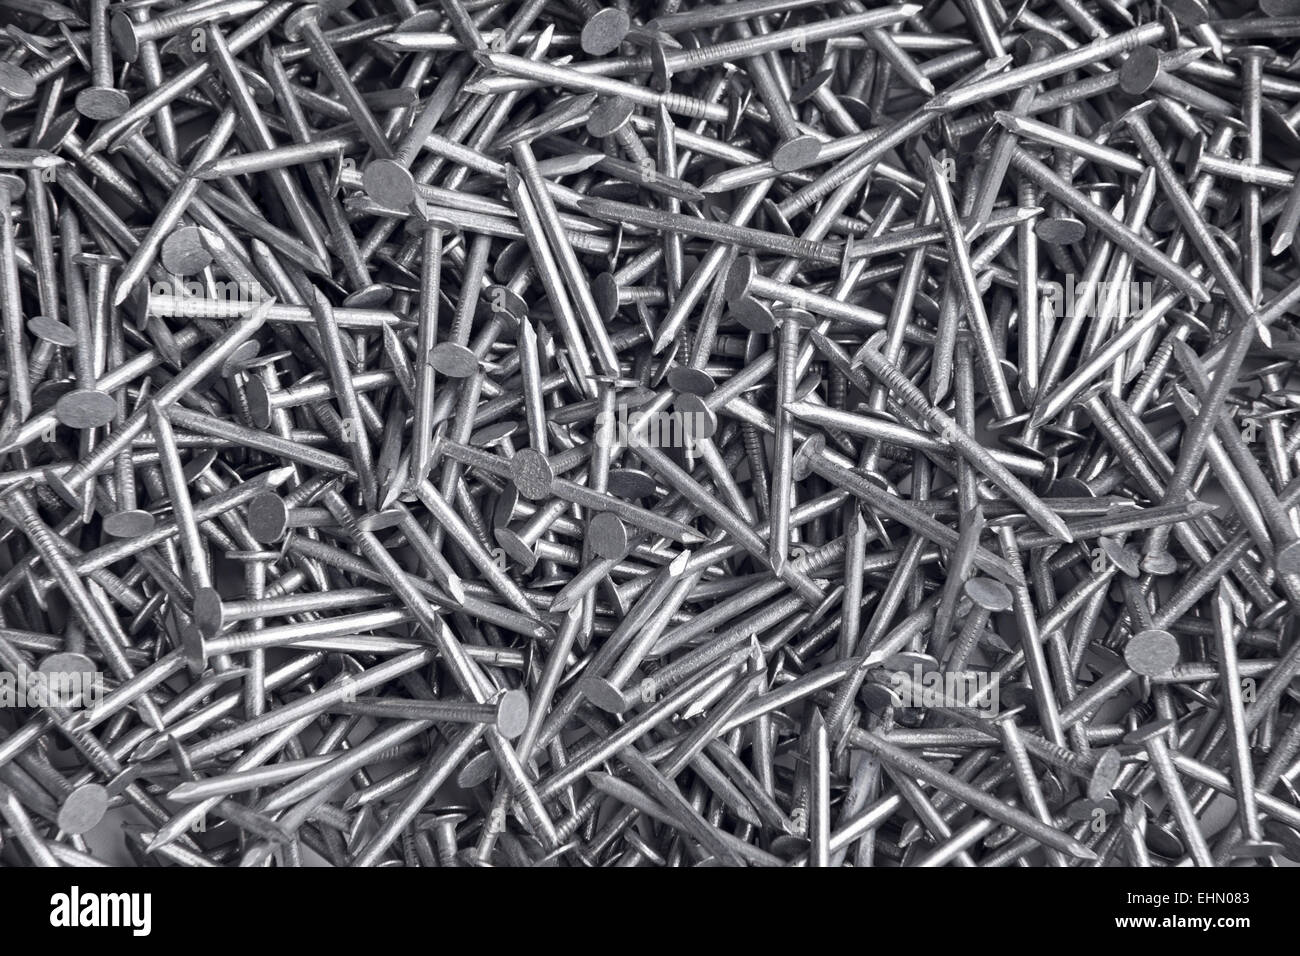 Galvanized nails top view Stock Photo